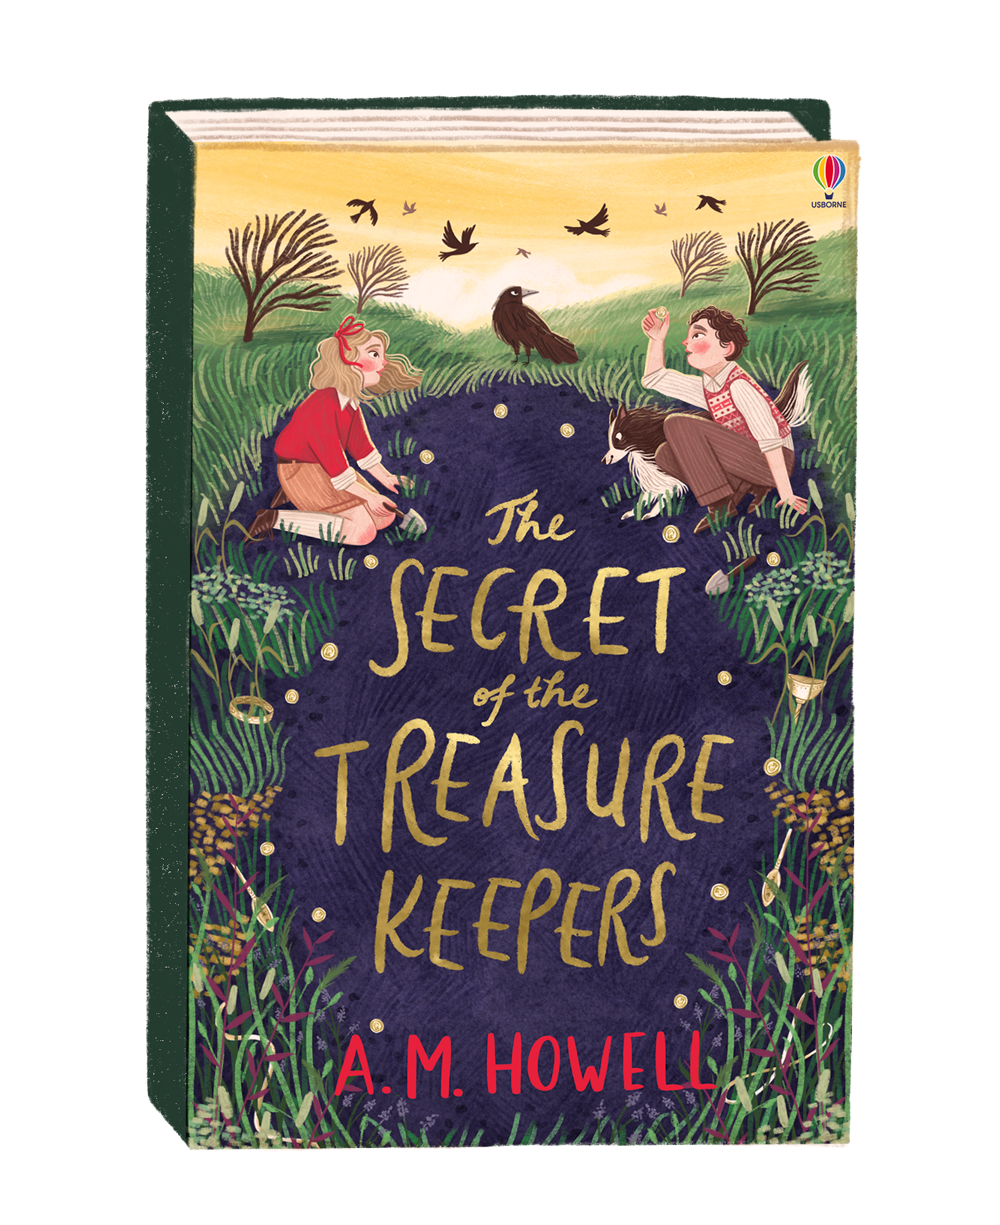 The Secret of The Treasure Keepers